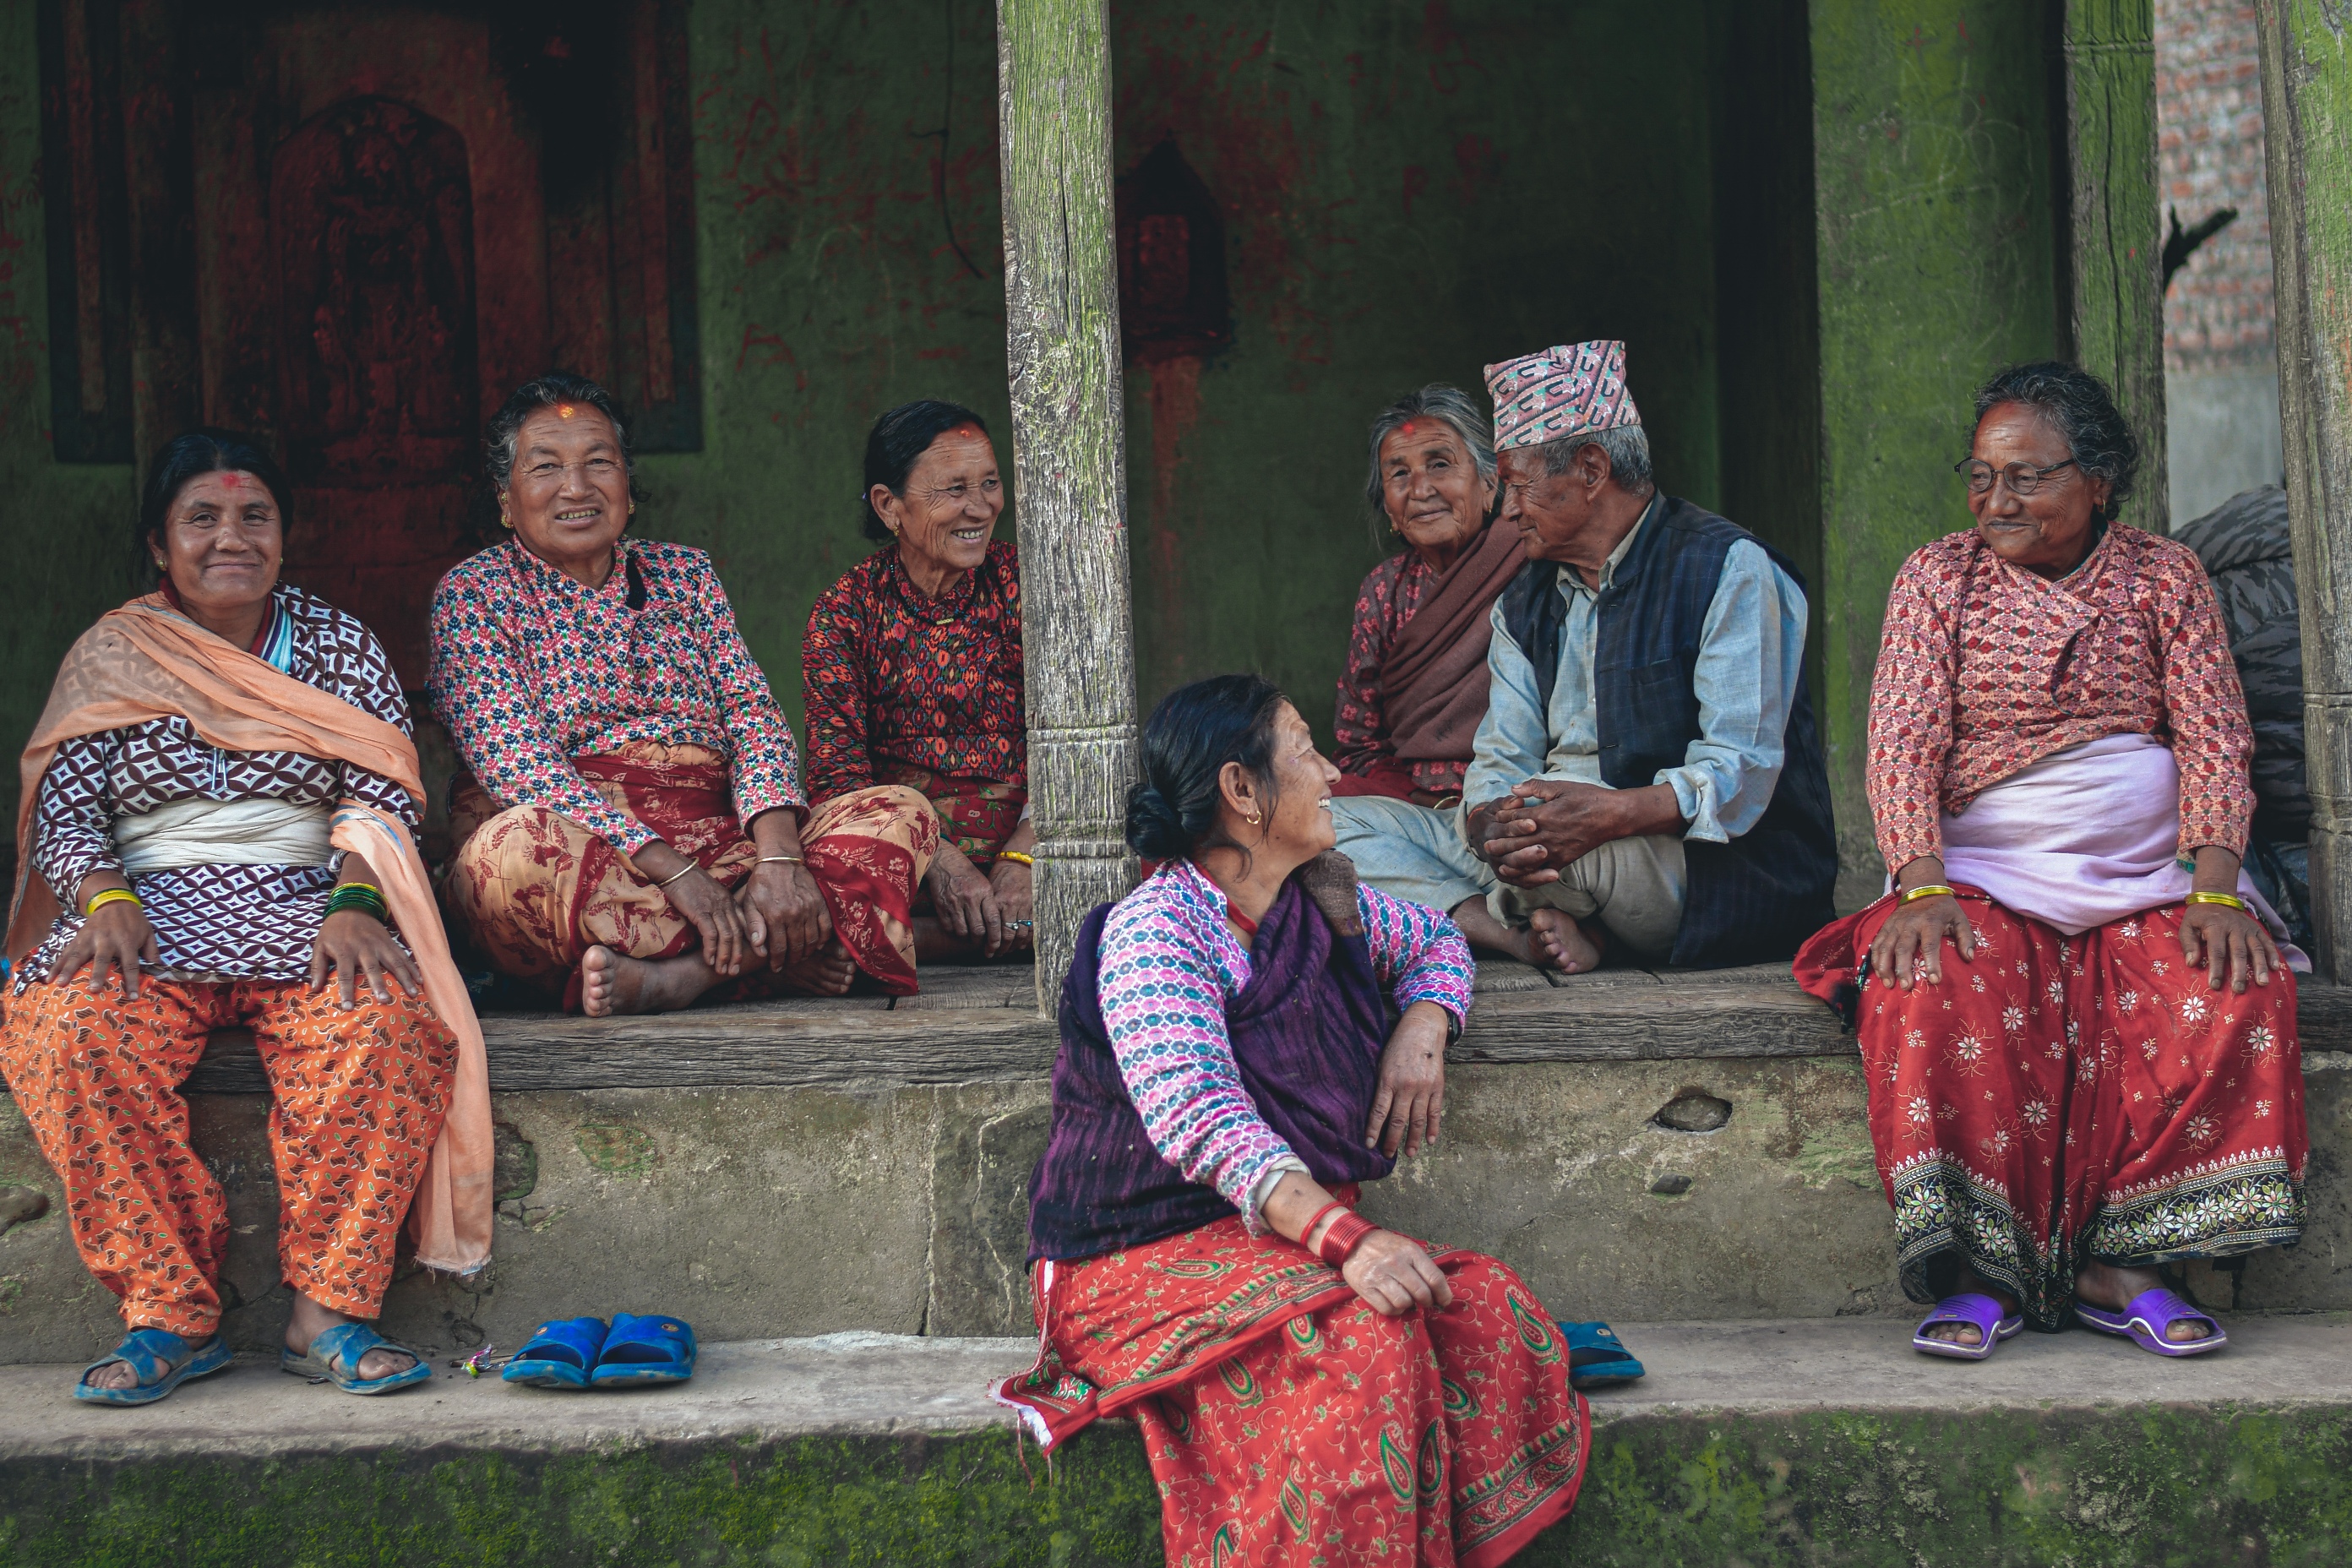  _392_https://www.helpage.org/silo/images/a-group-of-older-people-in-nepal--ganesh-bista--ageing-nepal_2784x1856.jpg